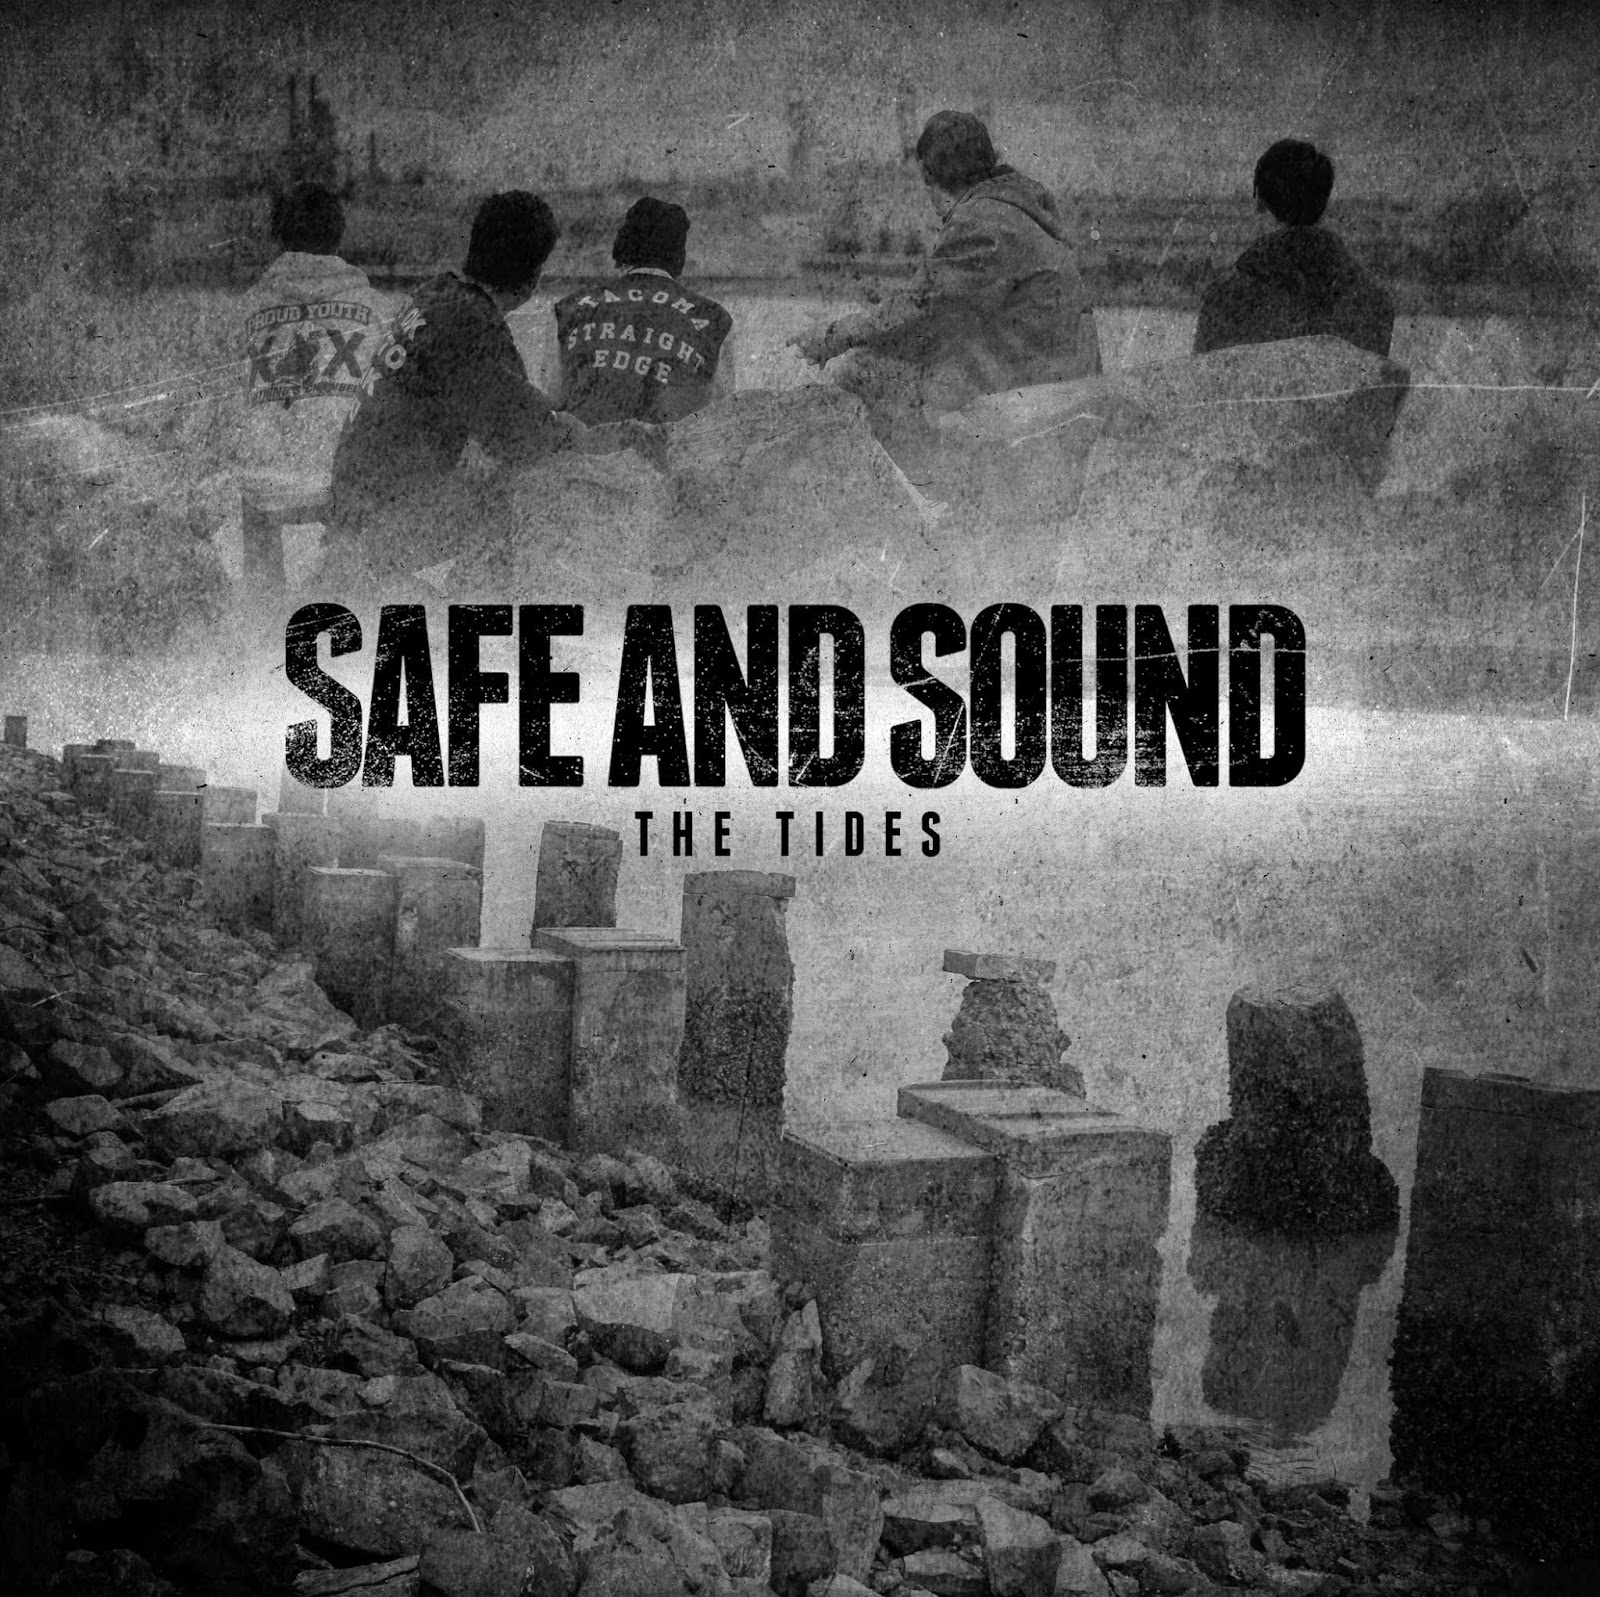 Safe and sound remix. Safe and Sound. Safe and Sound Capital Cities. Safe and Sound обложка. Safe and Sound idiom.